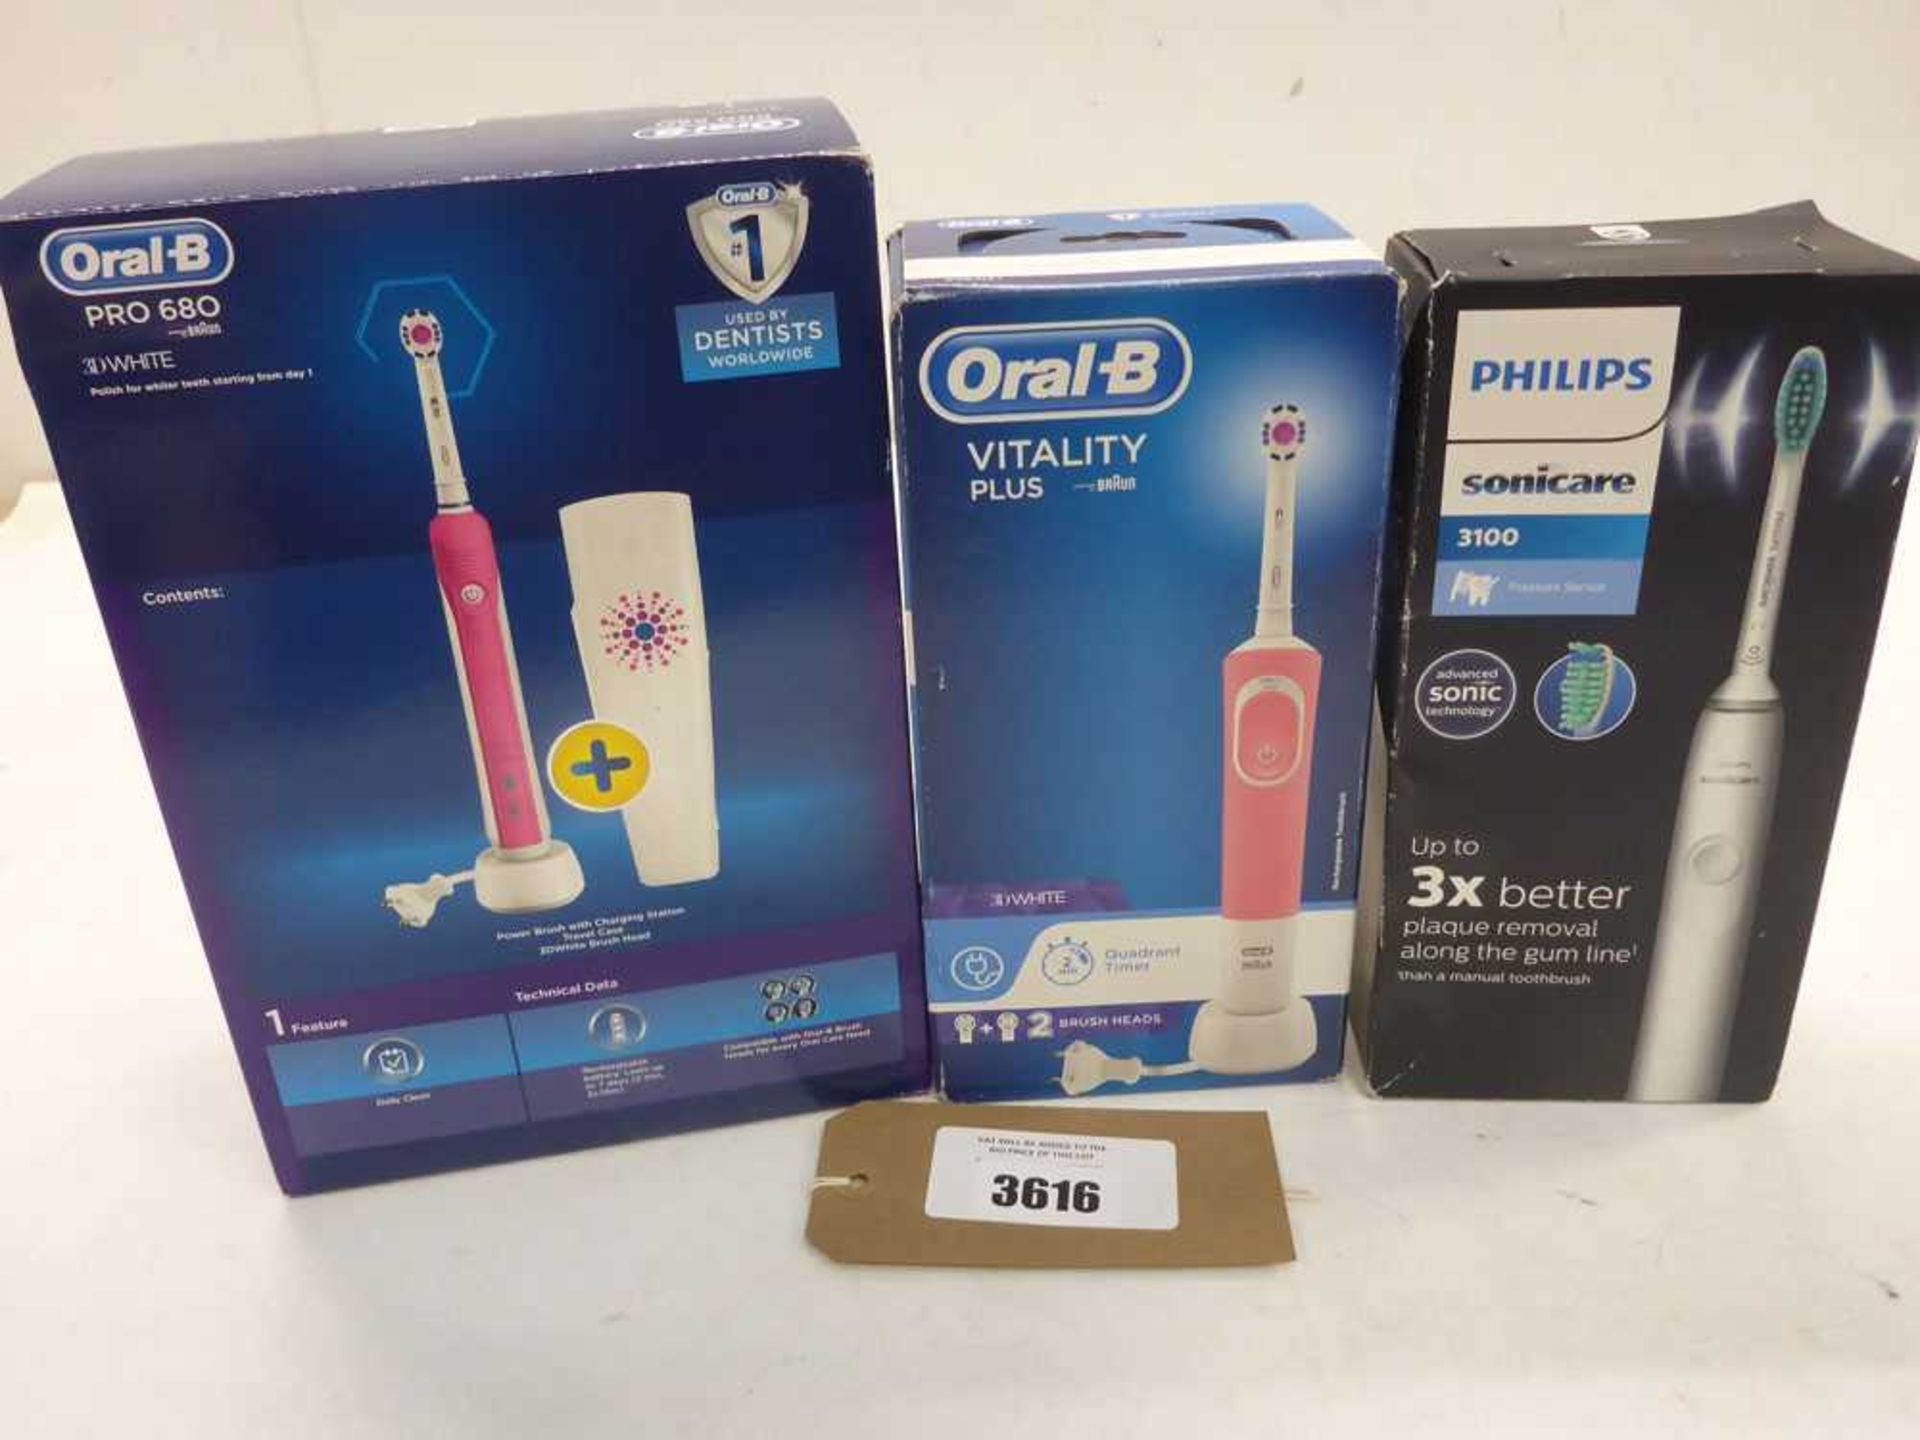 +VAT Oral B Pro 680 and Vitality Plus toothbrush sets and Philips Sonicare 3100